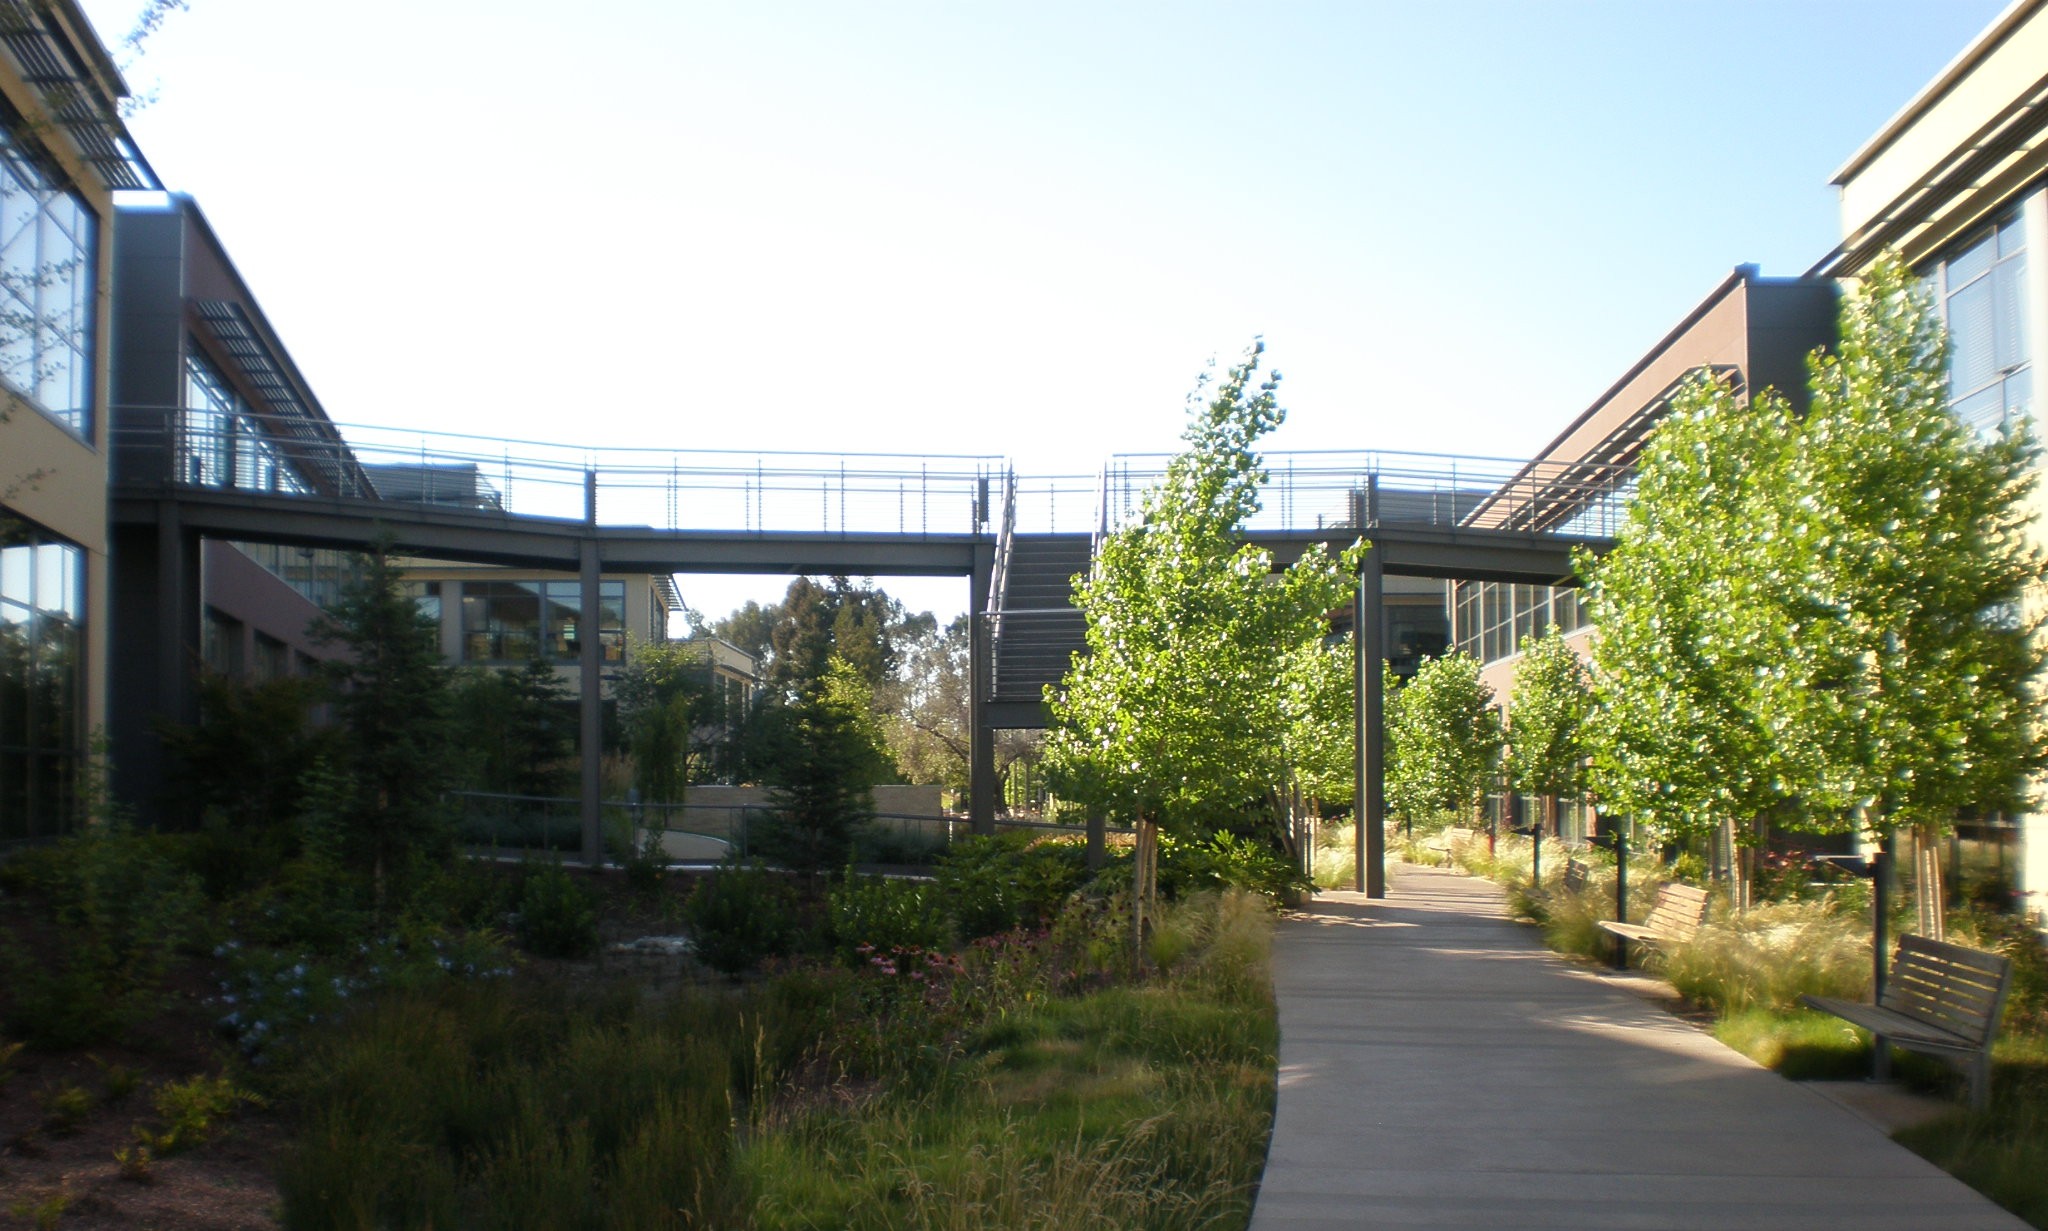 Palo Alto campus is an inviting 29-acre suburban site that features scenic tree-lined paths and modern, open buildings